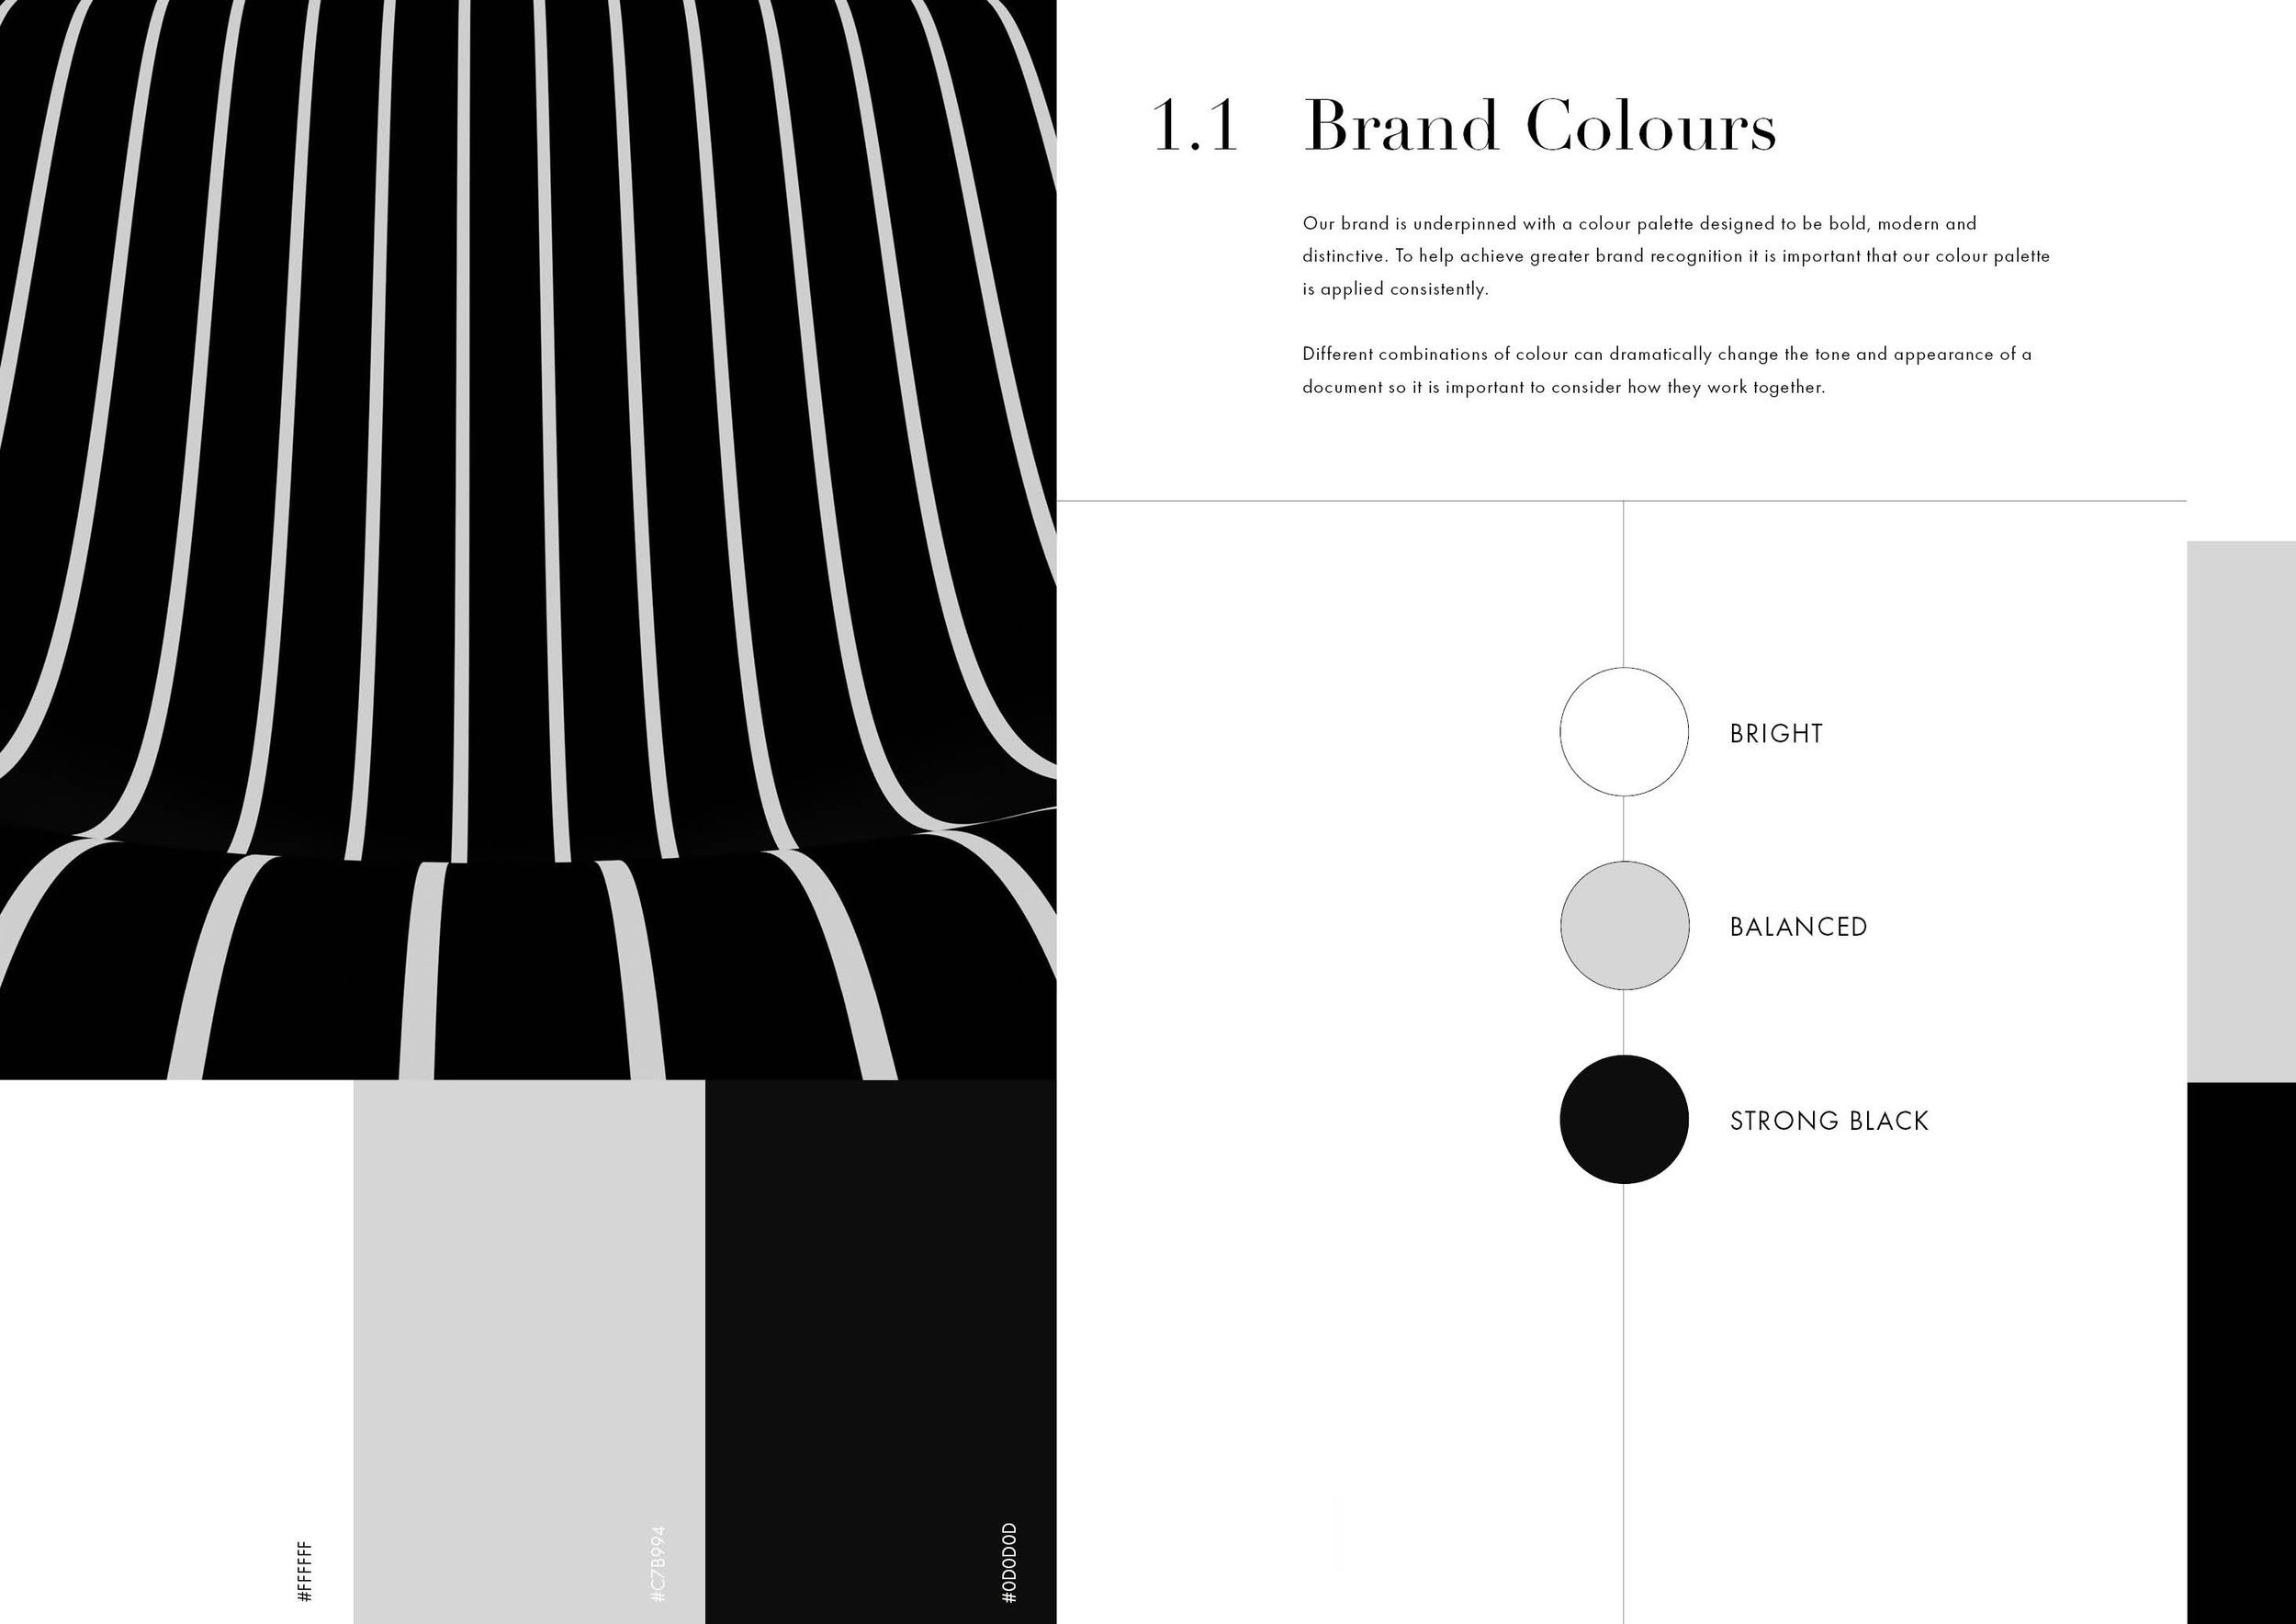 Ebony Color in Graphic Designing: What is it and Why is it Important?